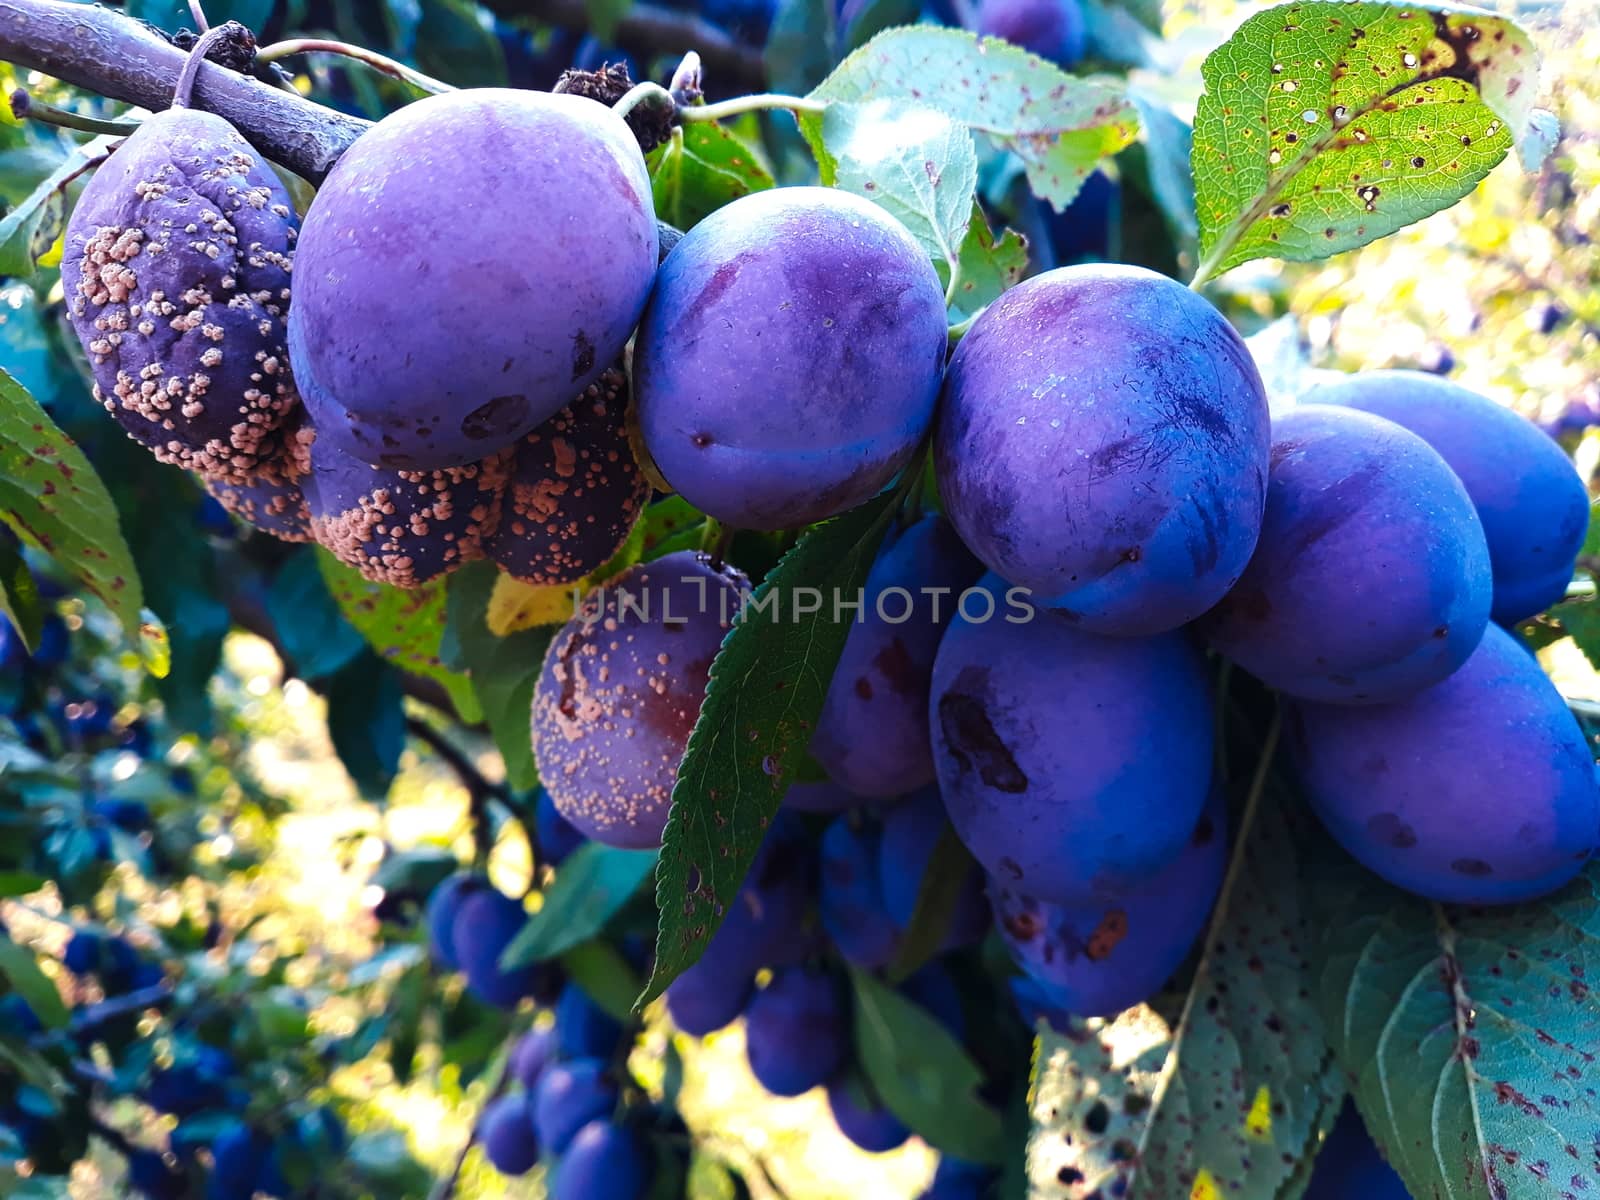 The group of the plums began to rot on the branch by mahirrov